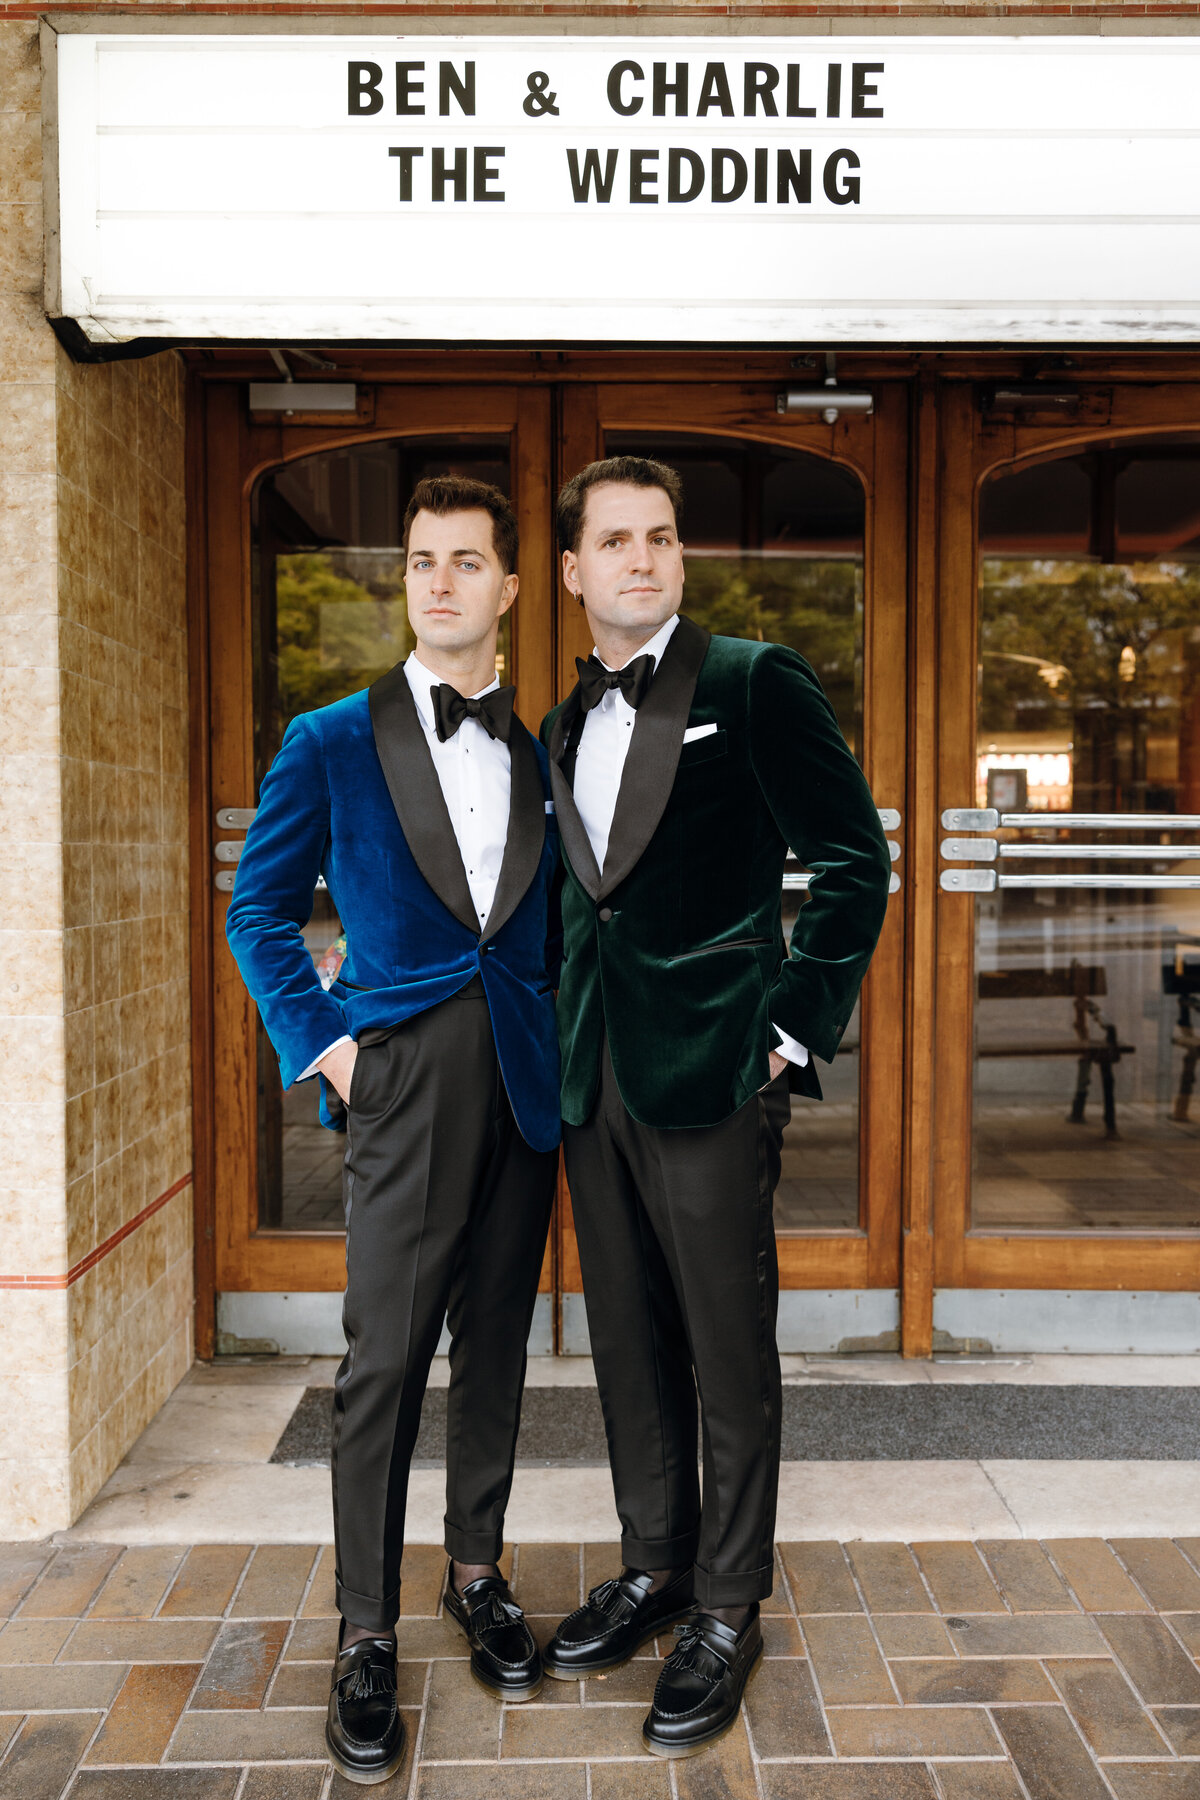 Text: Ben & Charlie The wedding. Two grooms outside their Regal Cinema wedding.